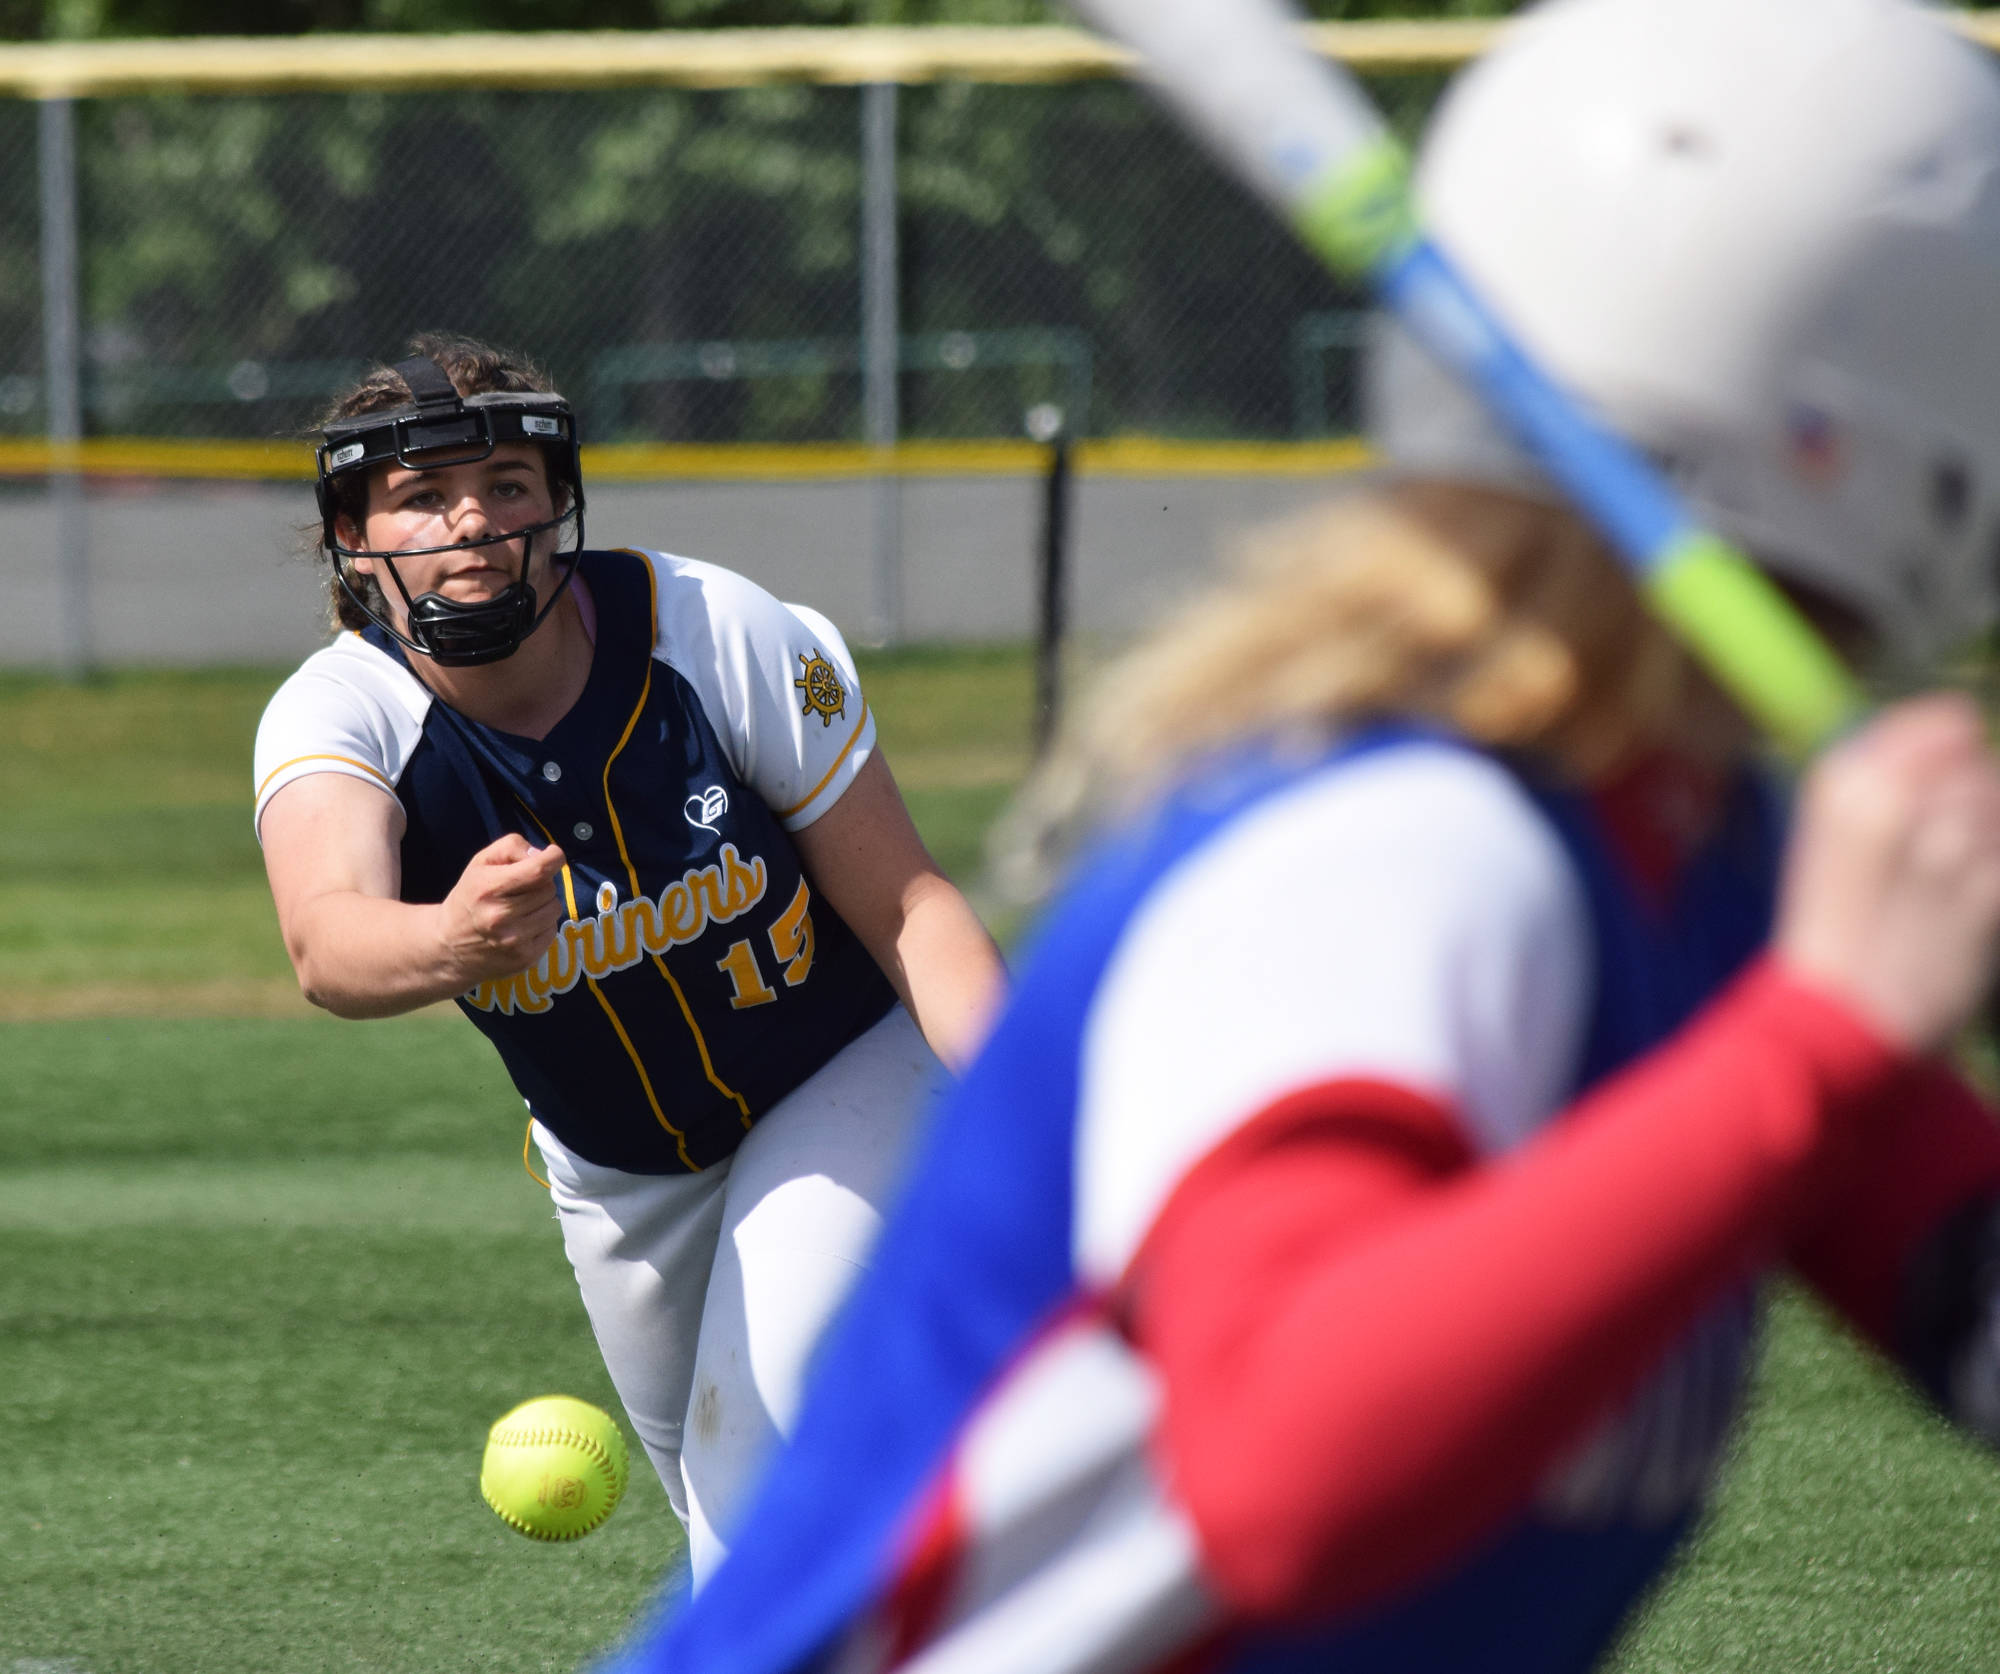 Homer’s Zoe Adkins unleashes a pitch for a Sitka batter at the Division II state softball tournament Friday, May 31, 2019, at Cartee Fields in Anchorage, Alaska.